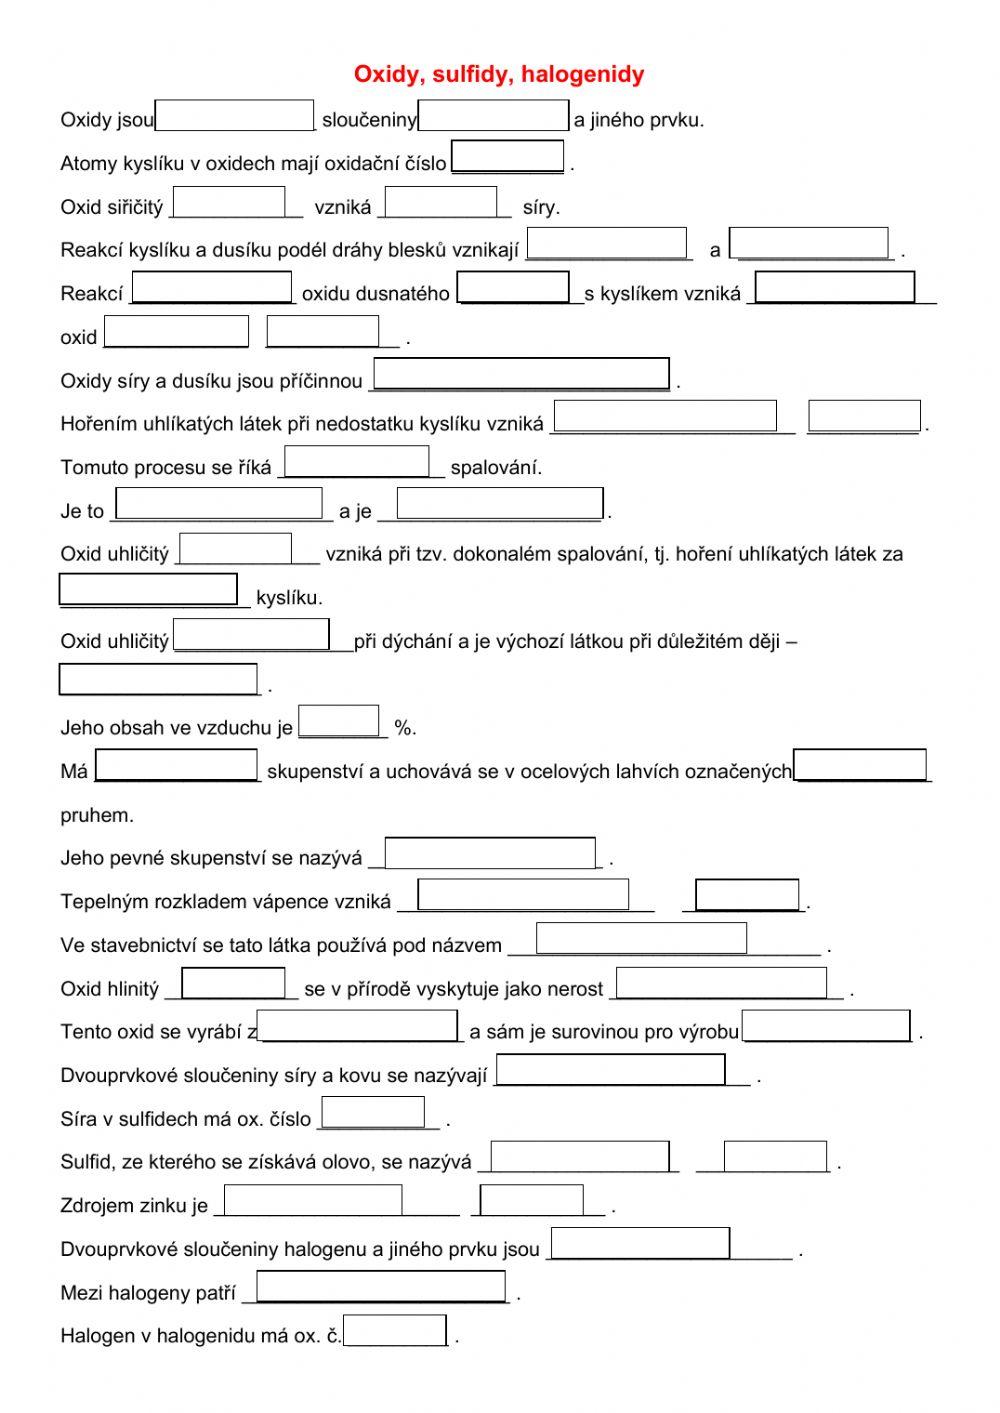 Oxidy, sulfidy, halogenidy worksheet | Live Worksheets